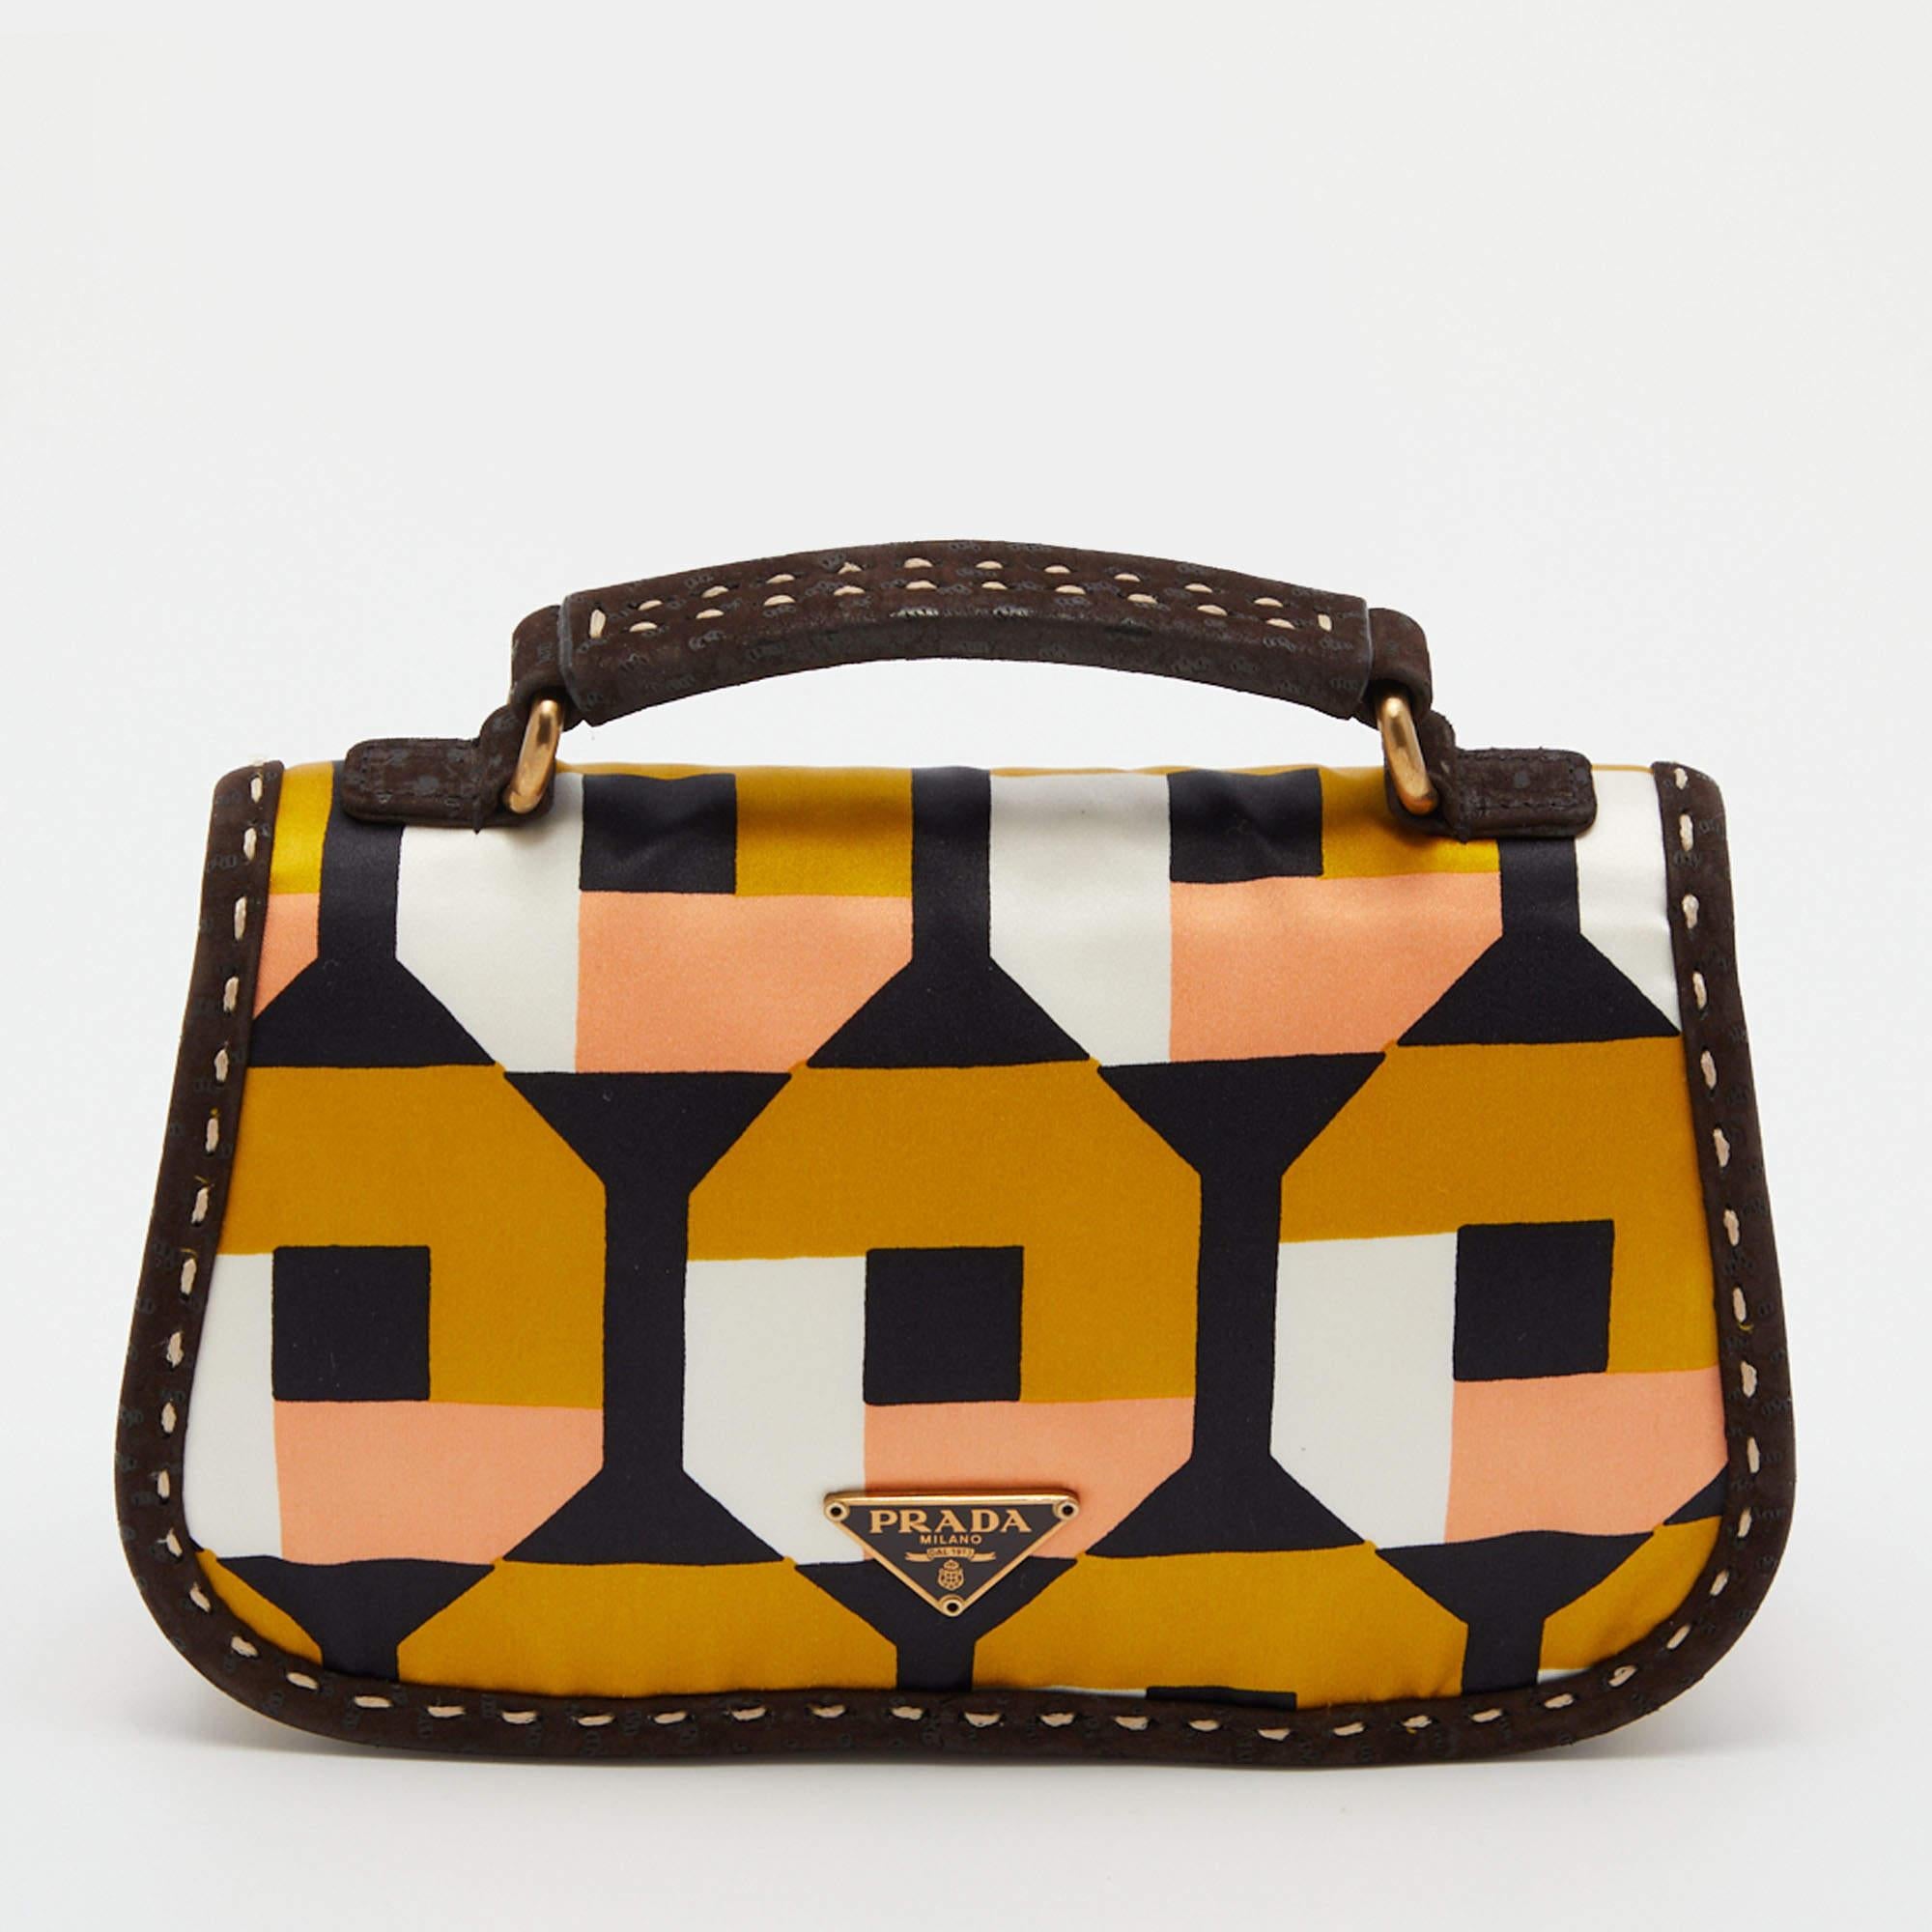 A cute little Prada pochette in printed satin & suede to add that little extra luxury to your ensemble. It is a super mini bag that you can parade using the top handle.

Includes: Original Dustbag, Info Booklet, Pocket Mirror, Authenticity Card

